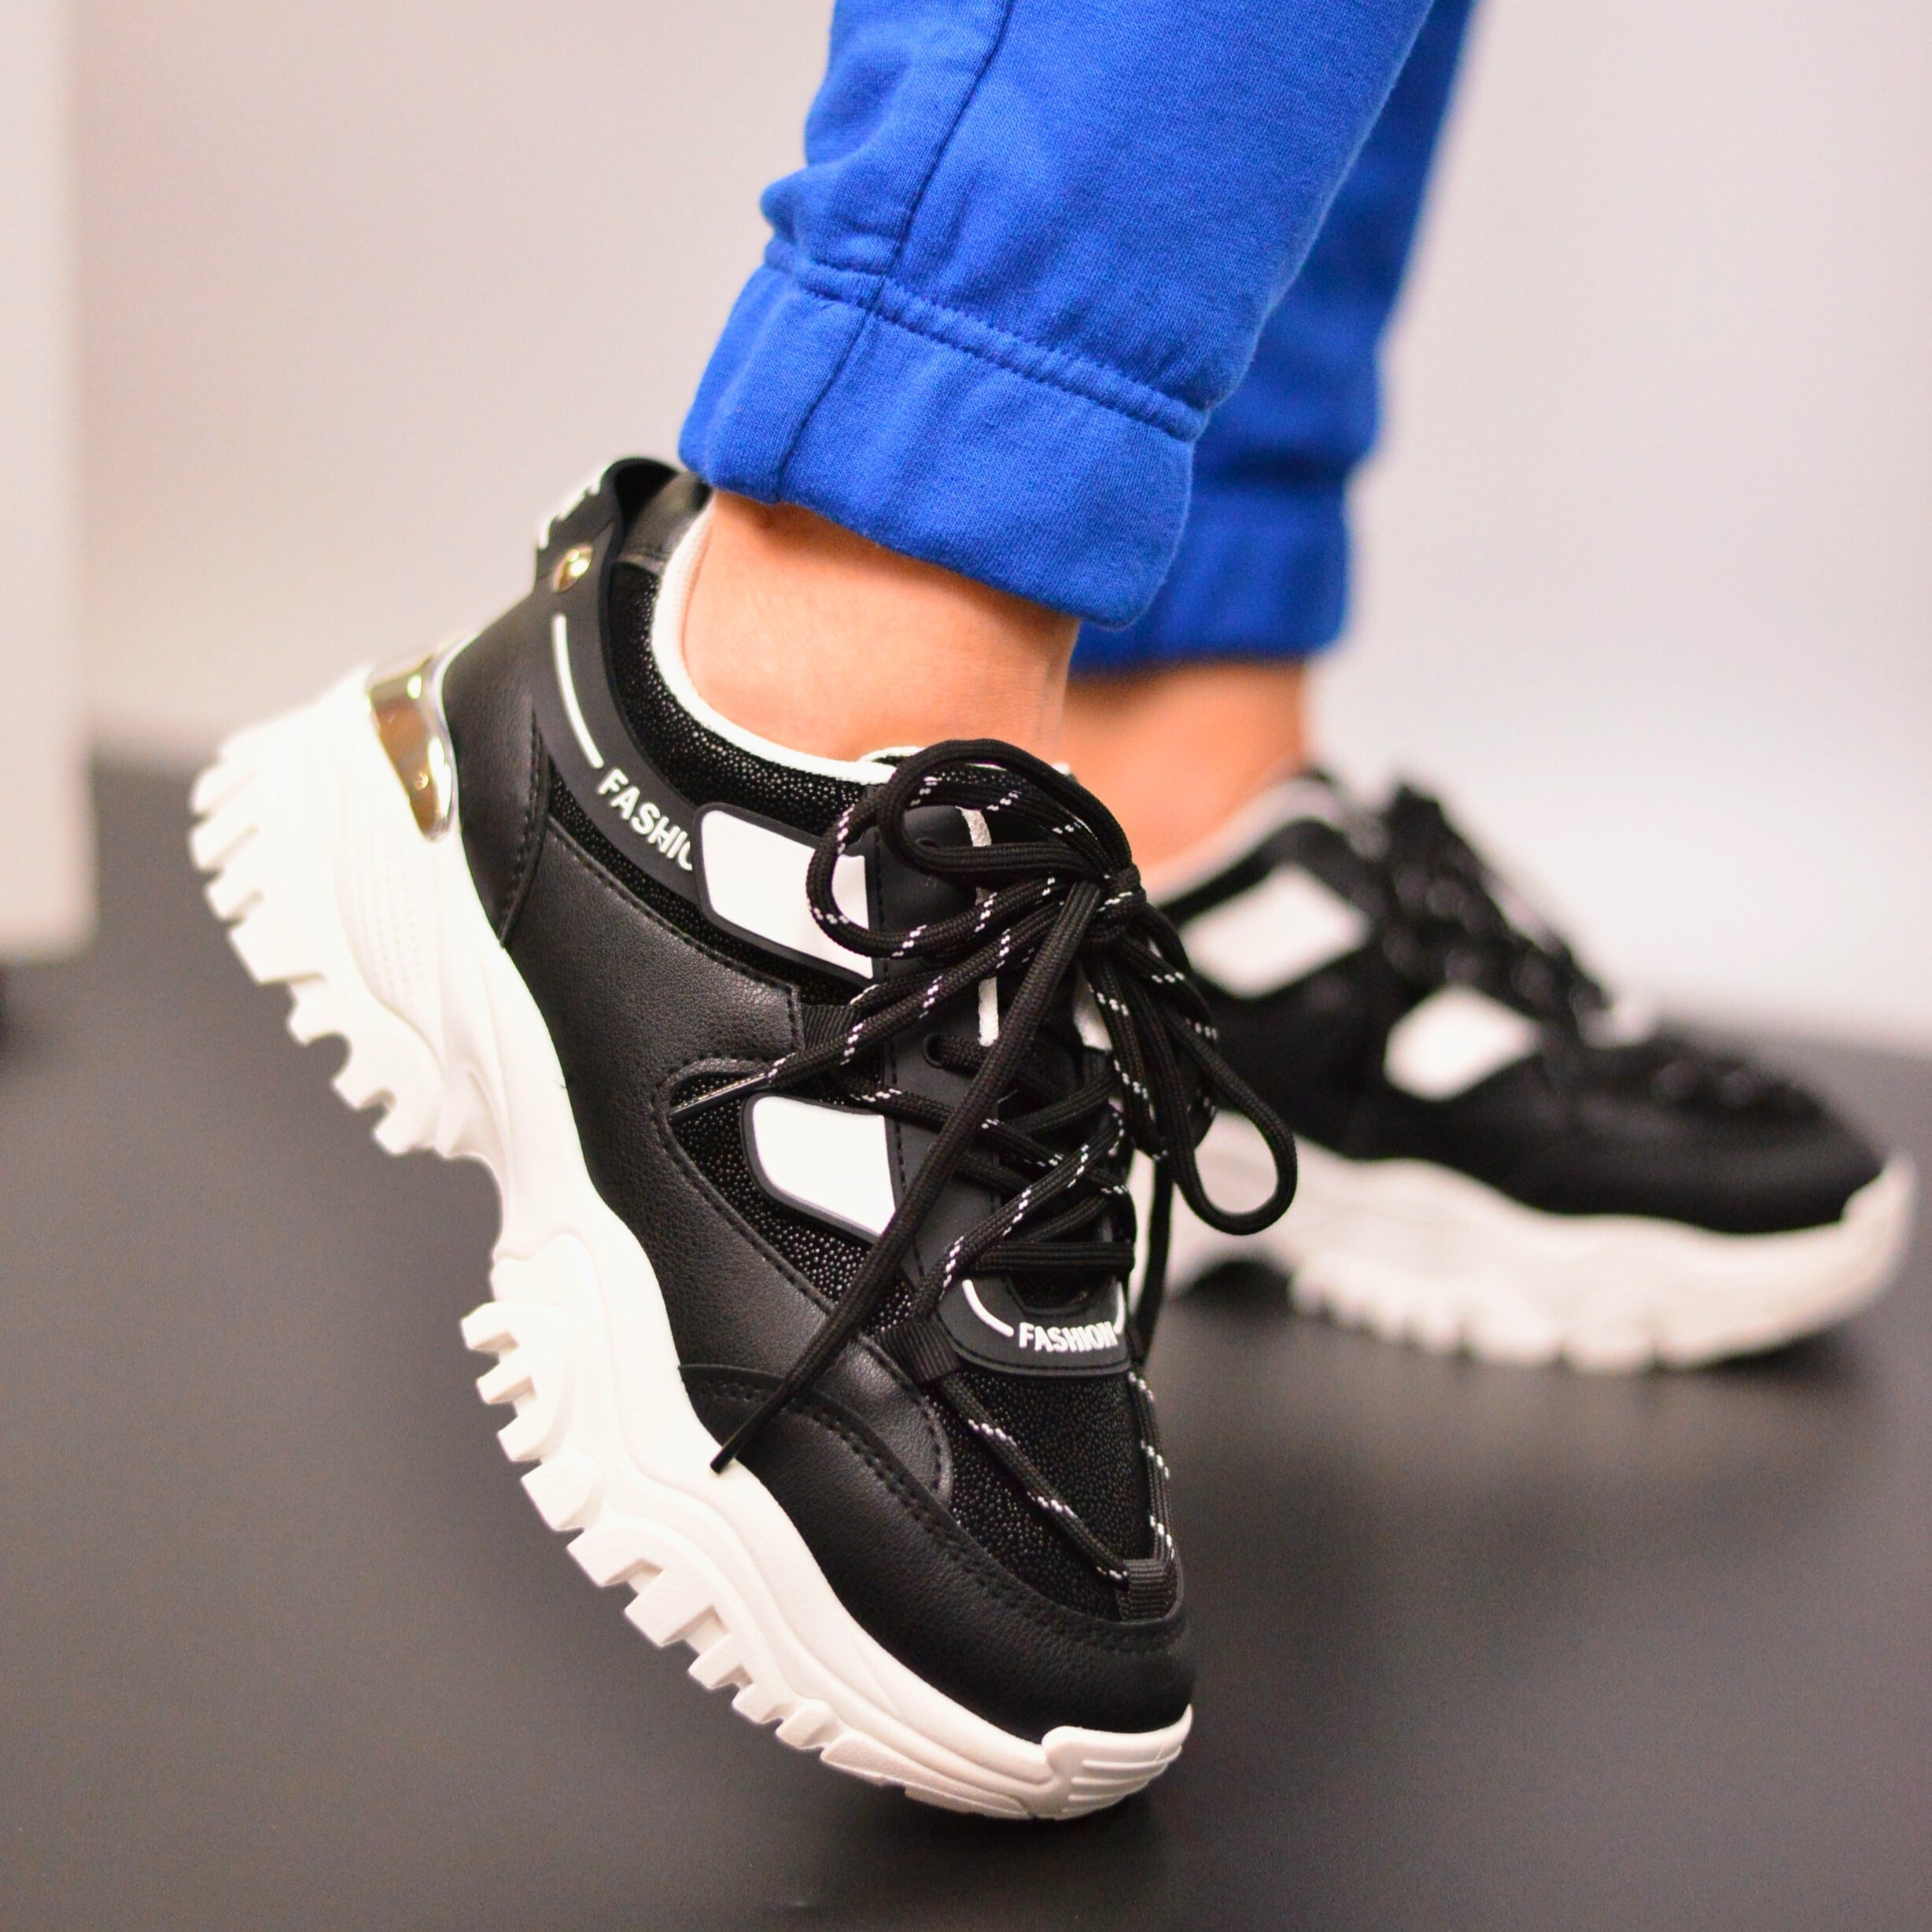 Women's Black Inna Sneakers Made Of Ecological Leather